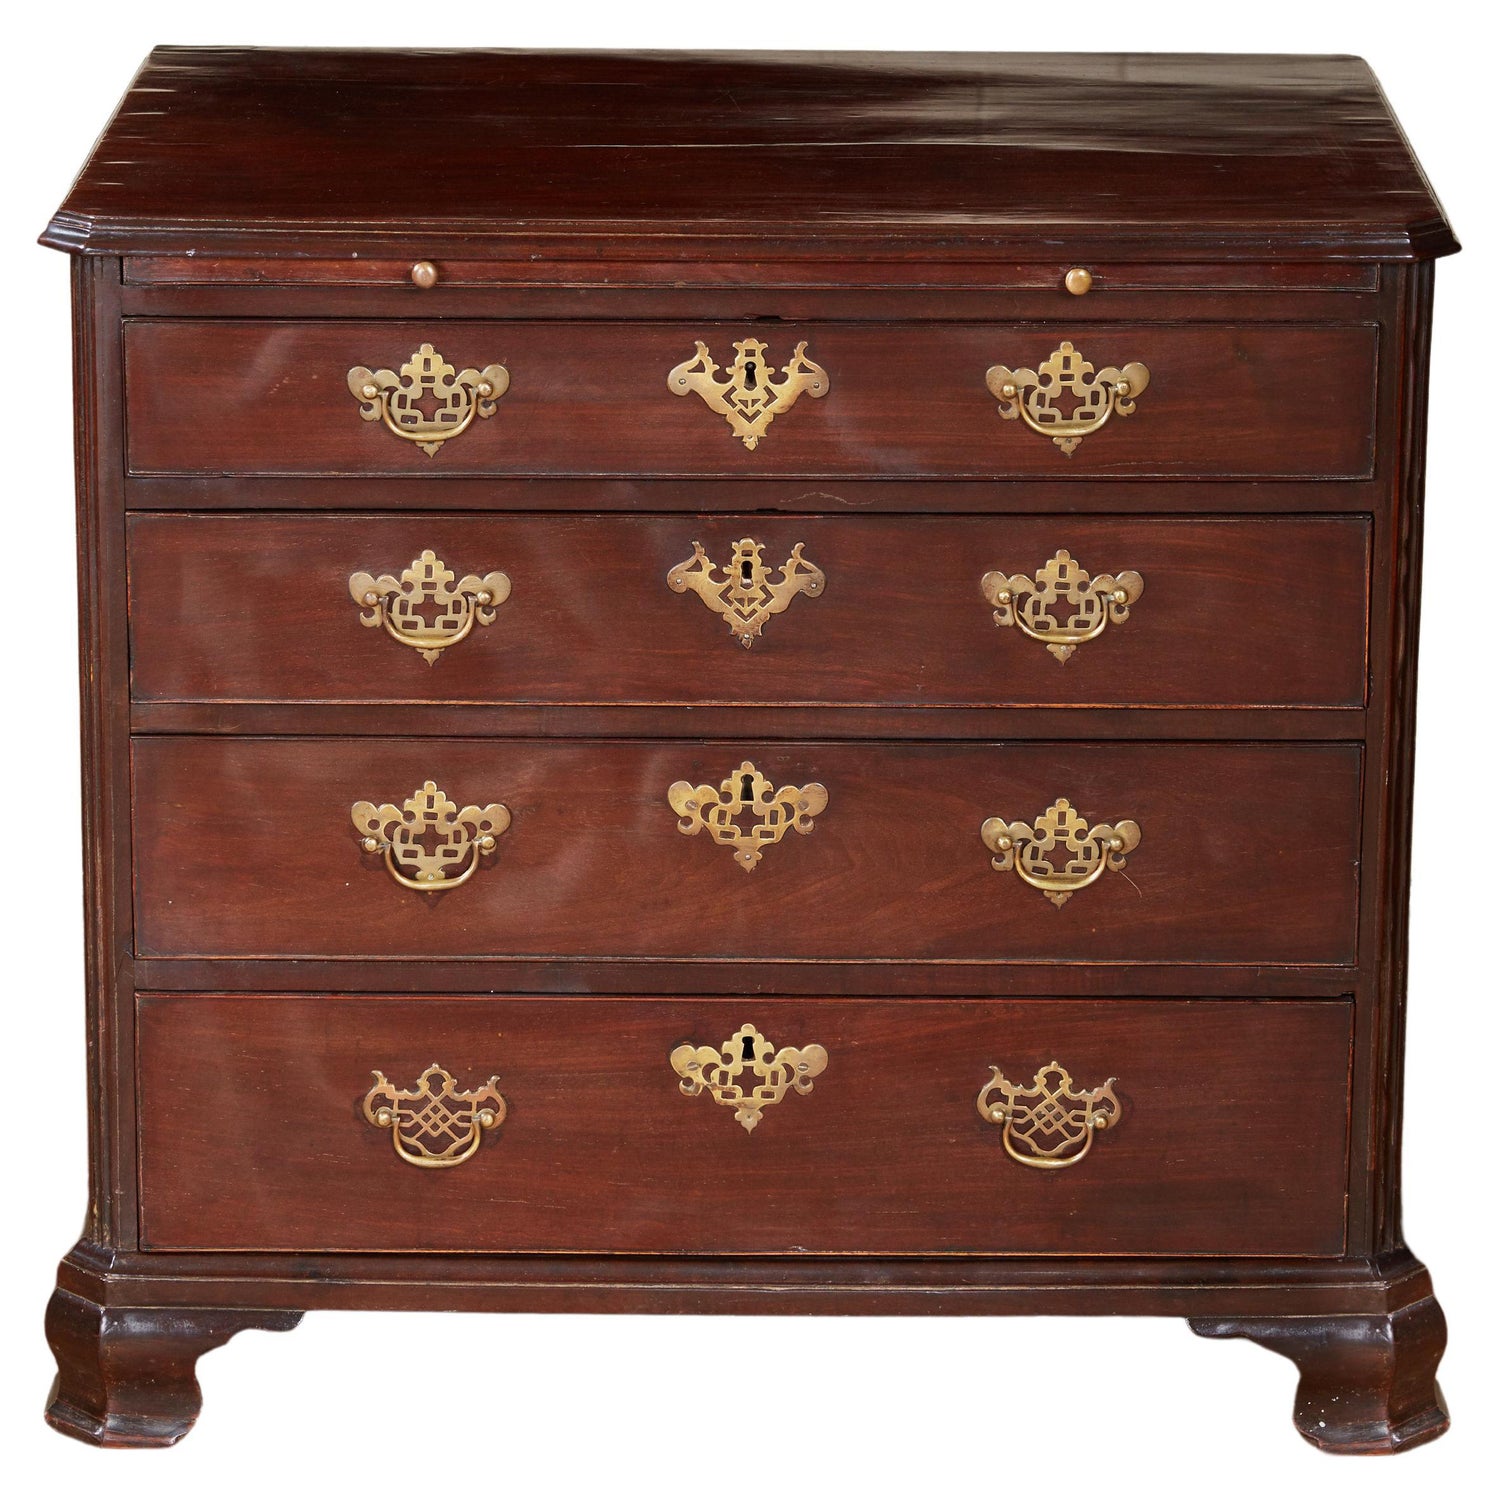 Very Fine and Rare Chippendale Highly Figured Mahogany Serpentine-Front  Chest of Drawers, Attributed to Jonathan Gostelowe (1745-1795),  Philadelphia, Pennsylvania, Circa 1785, Important Americana, 2023